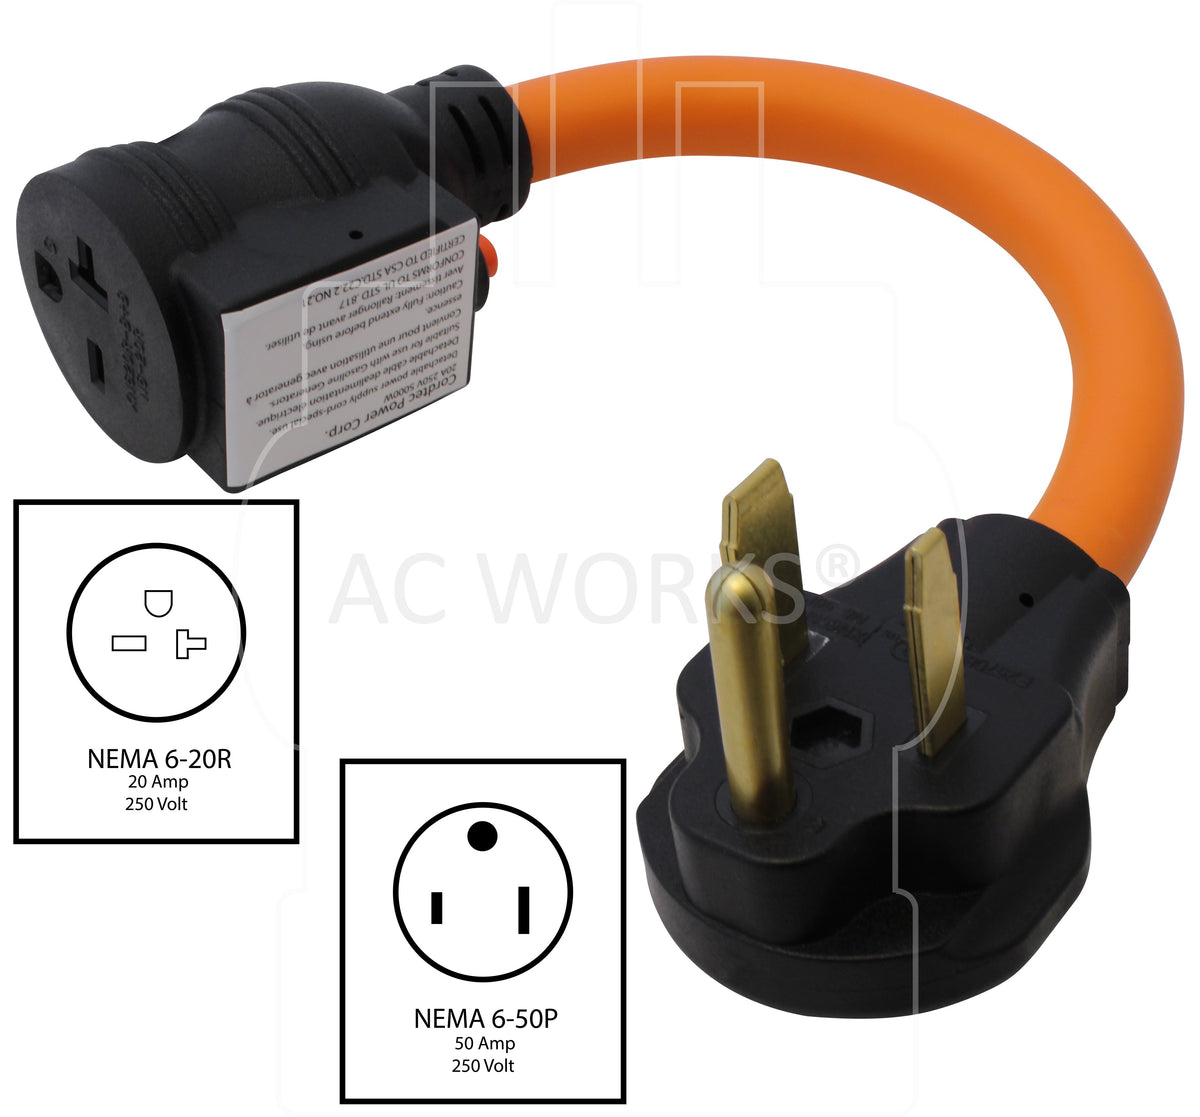 AC WORKS® [S650CB620] 1.5FT 50A 3-Prong 6-50P Welder Plug to 6-15/20 Outlet  with 20A Breaker